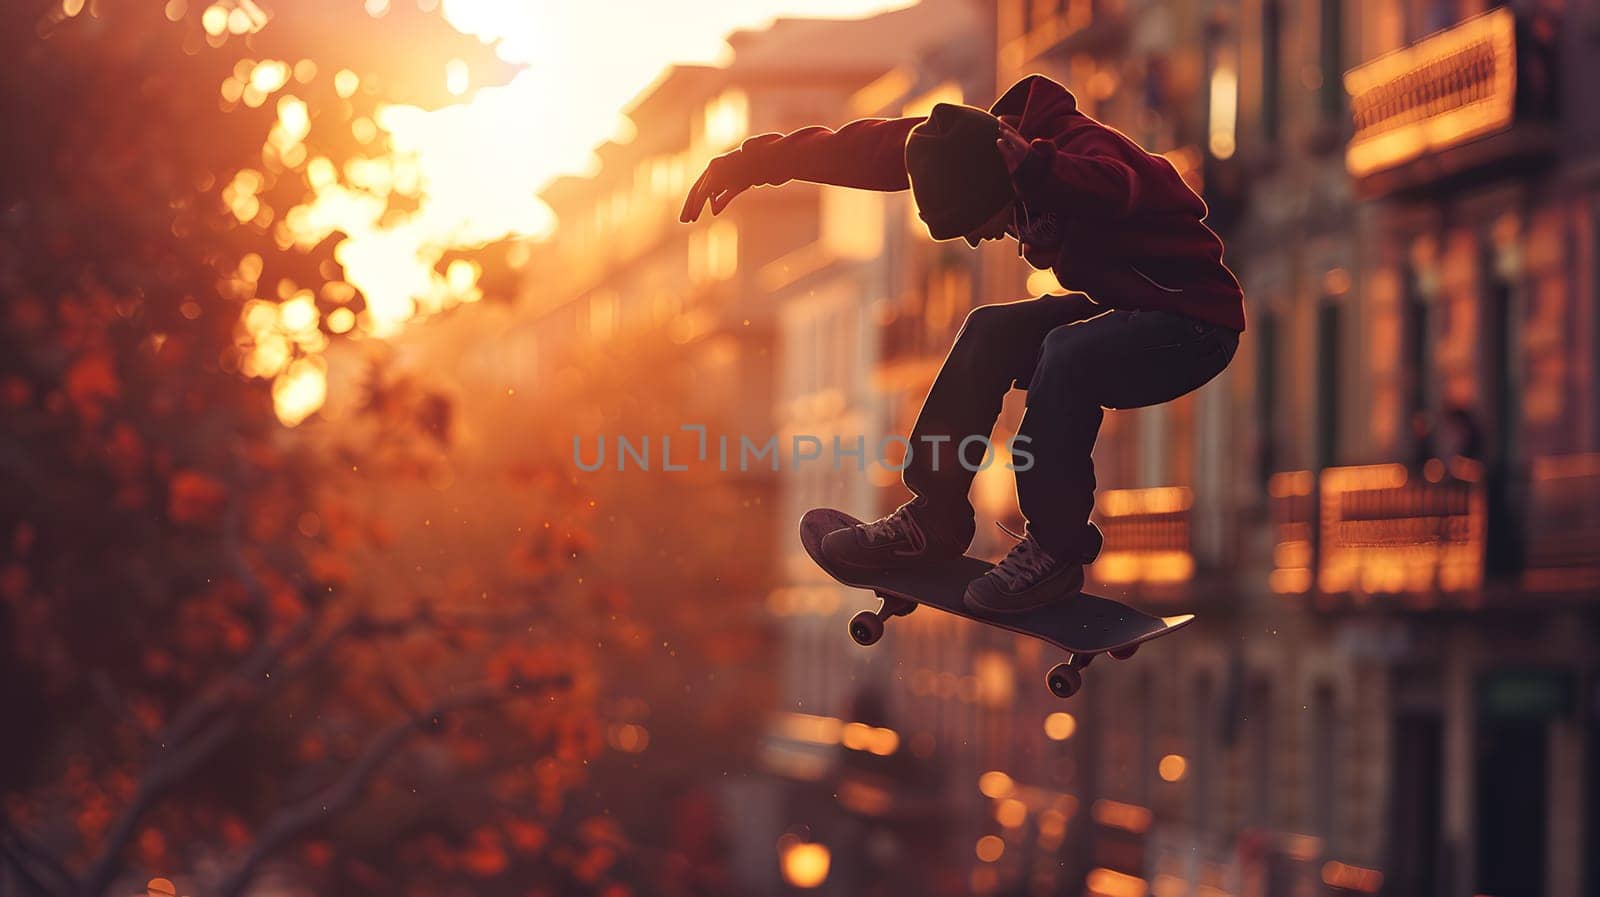 Skateboarder performing a trick in the morning sky by Nadtochiy